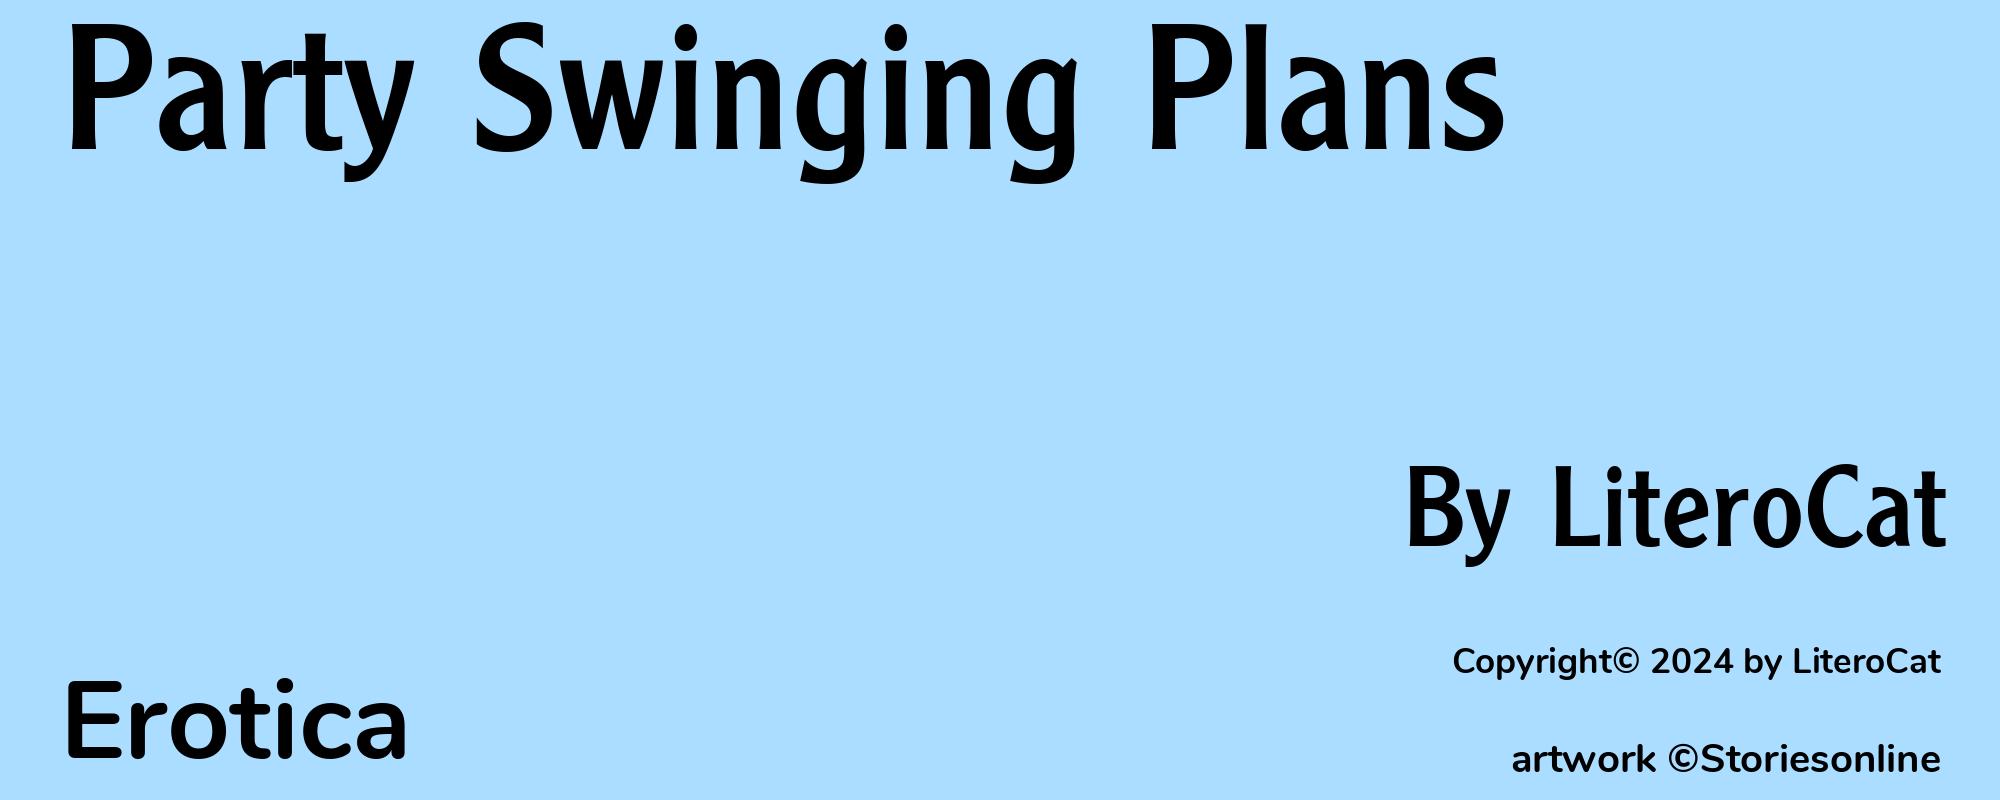 Party Swinging Plans - Cover